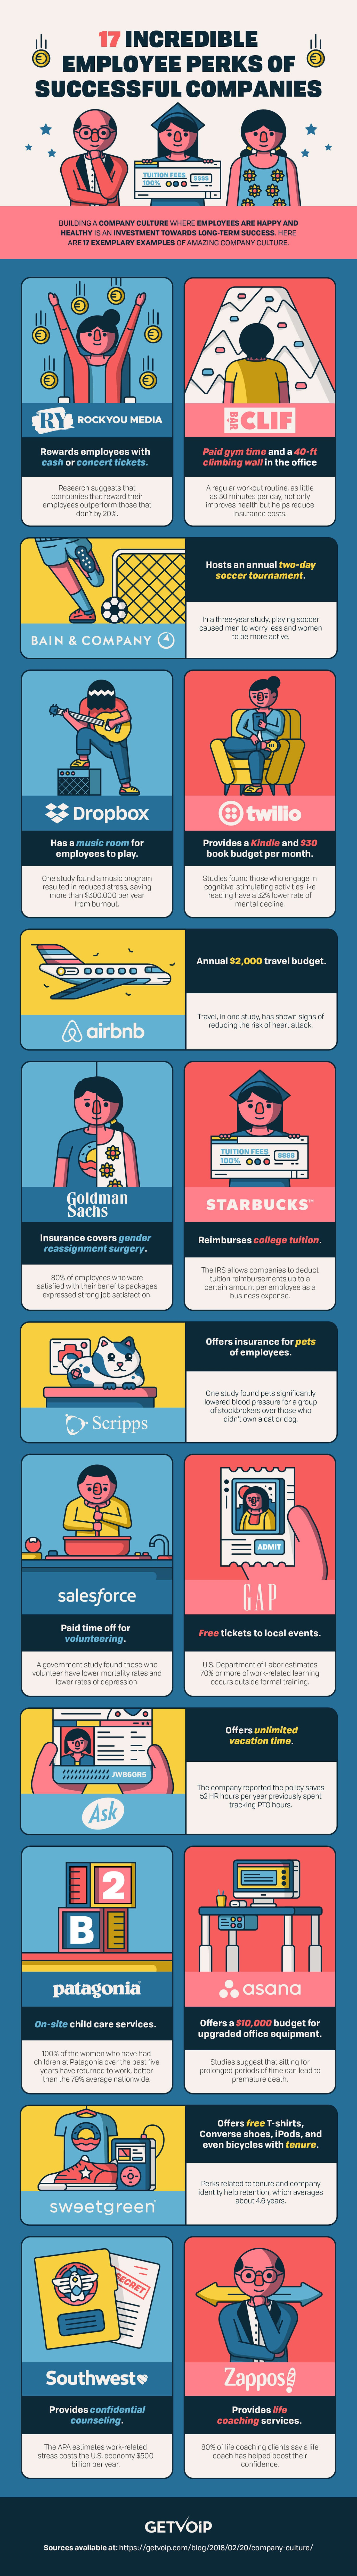 17 Incredible Employee Perks of Successful Companies - #infographic